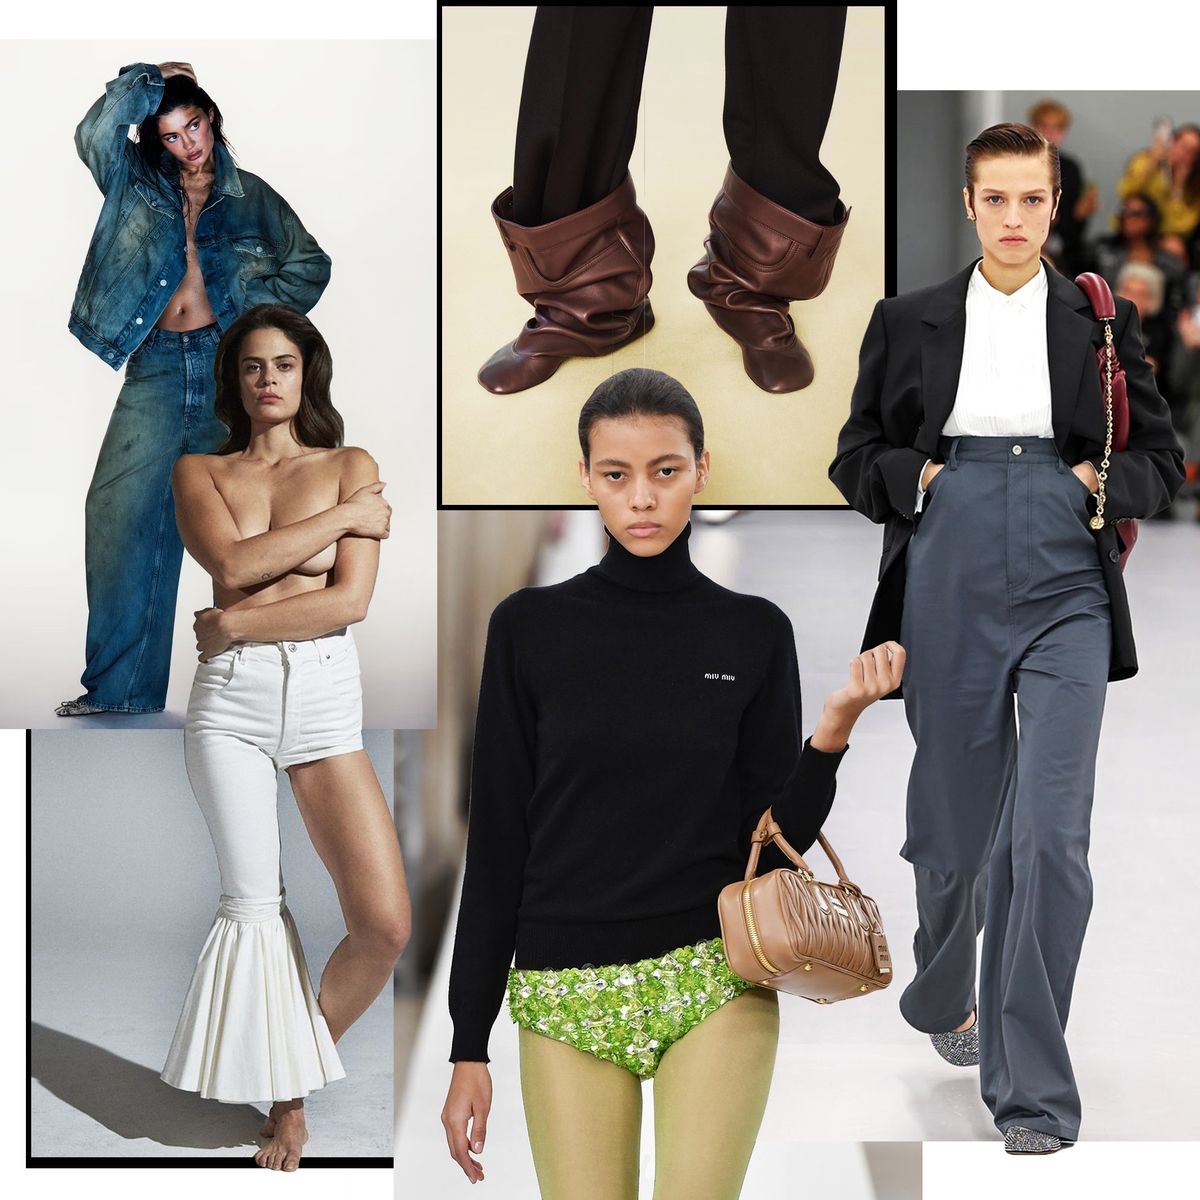 Stylists reveal 7 pant trends that are in and 6 that are out this year